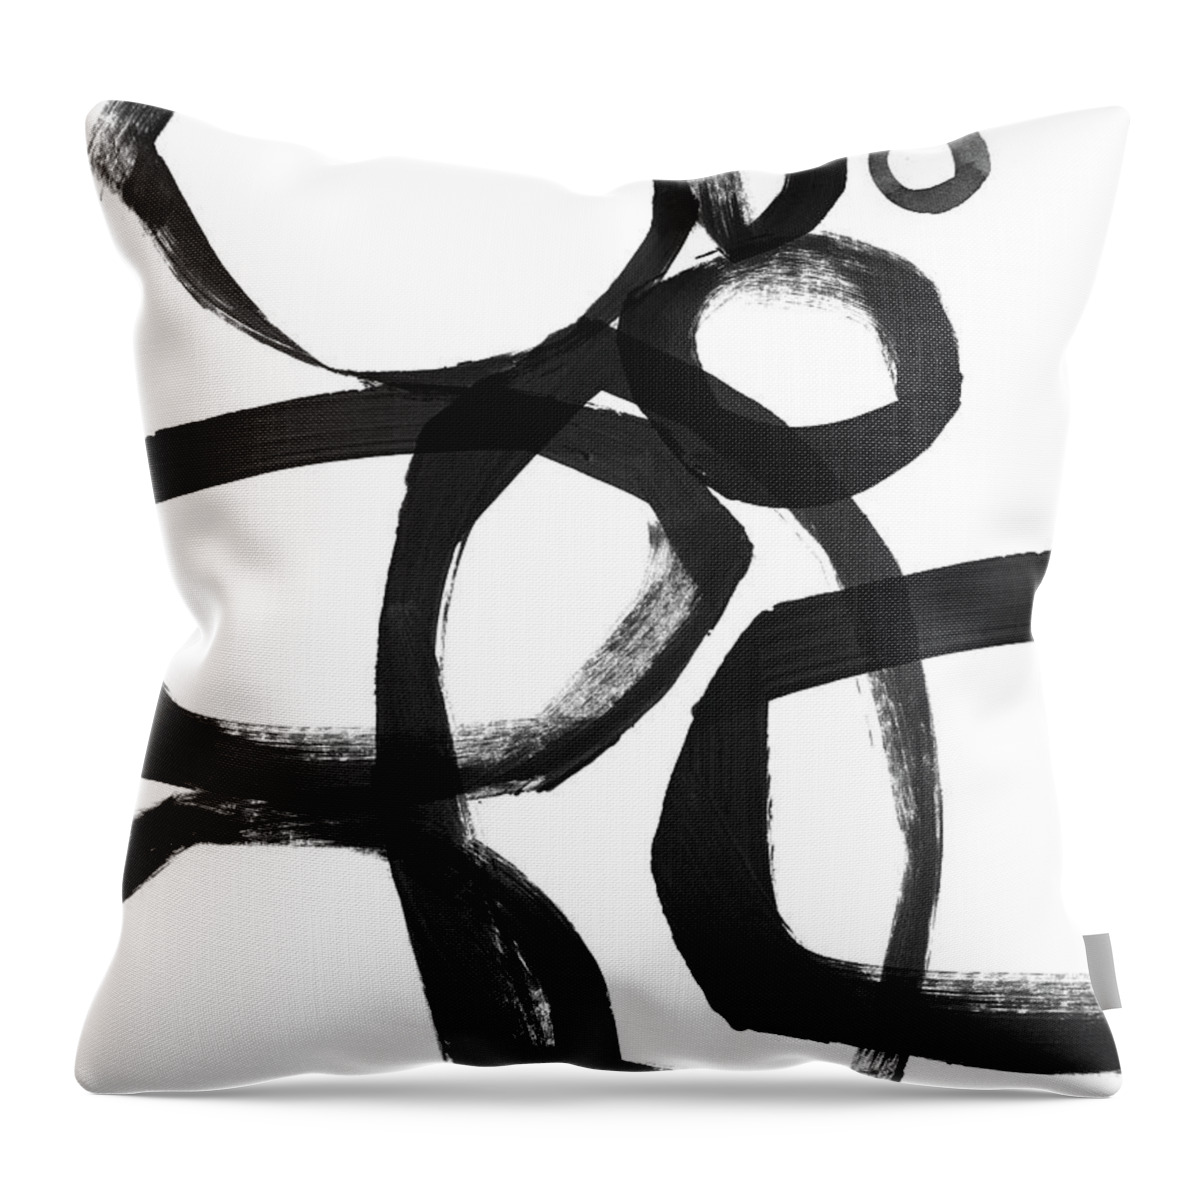 Abstract Throw Pillow featuring the painting Black Brushstroke Circles 2- Art by Linda Woods by Linda Woods